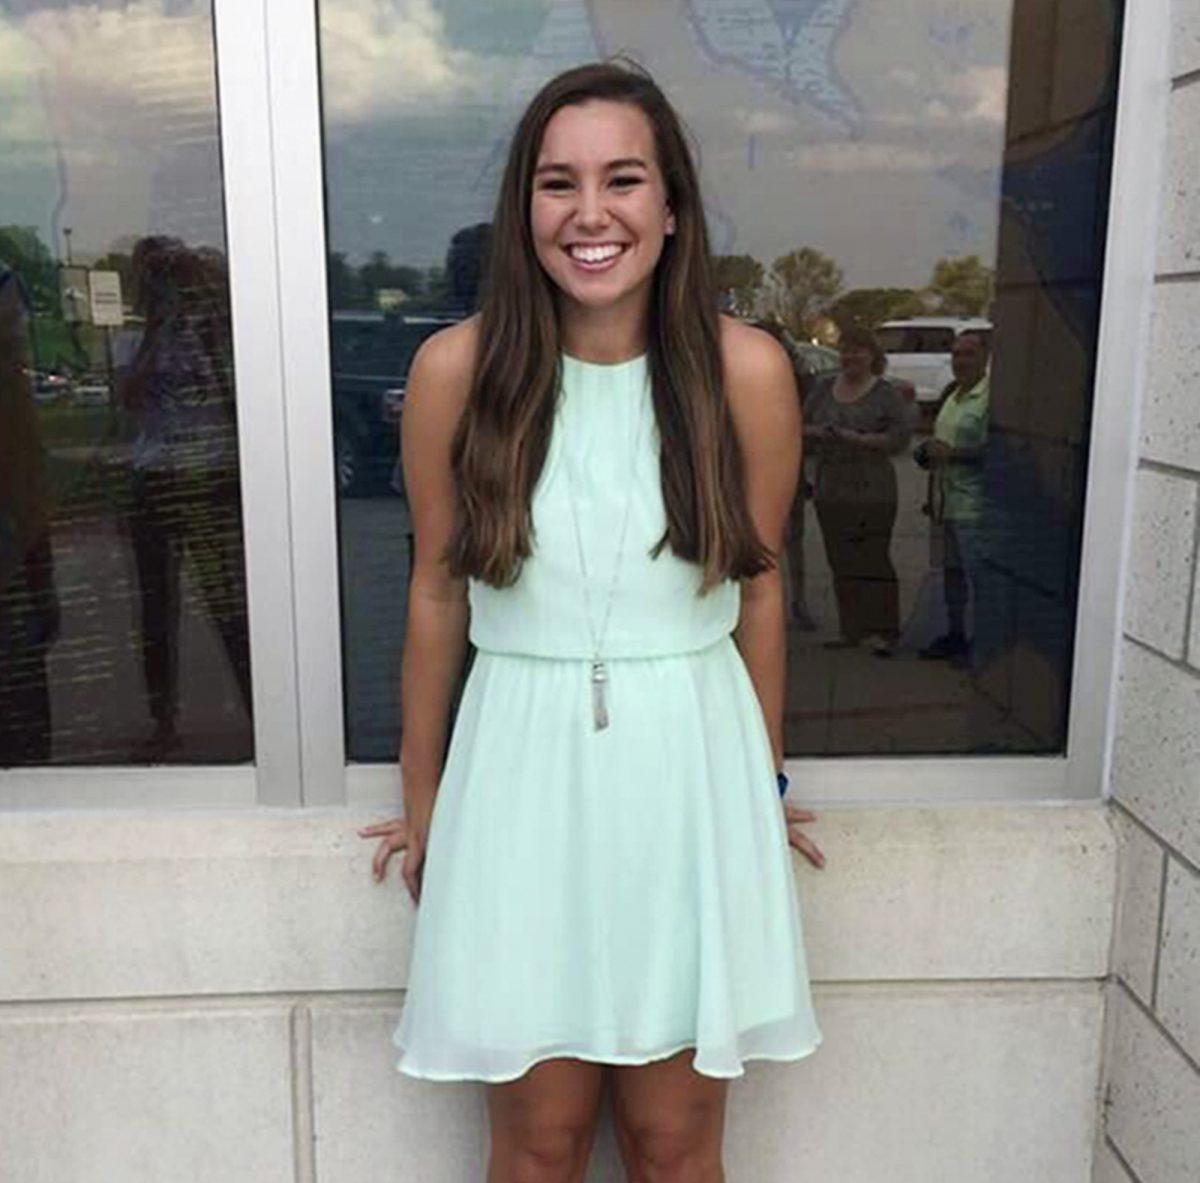 This undated photo released by the Iowa Department of Criminal Investigation shows Mollie Tibbetts, a University of Iowa student who was reported missing from her hometown in the eastern Iowa city of Brooklyn on Thursday, July 19, 2018. A neighbor reported seeing her going for a jog Wednesday evening. The Poweshiek County Sheriff's Office said Monday, July 23, 2018, that Tibbetts had not been found. (Iowa Department of Criminal Investigation/AP)